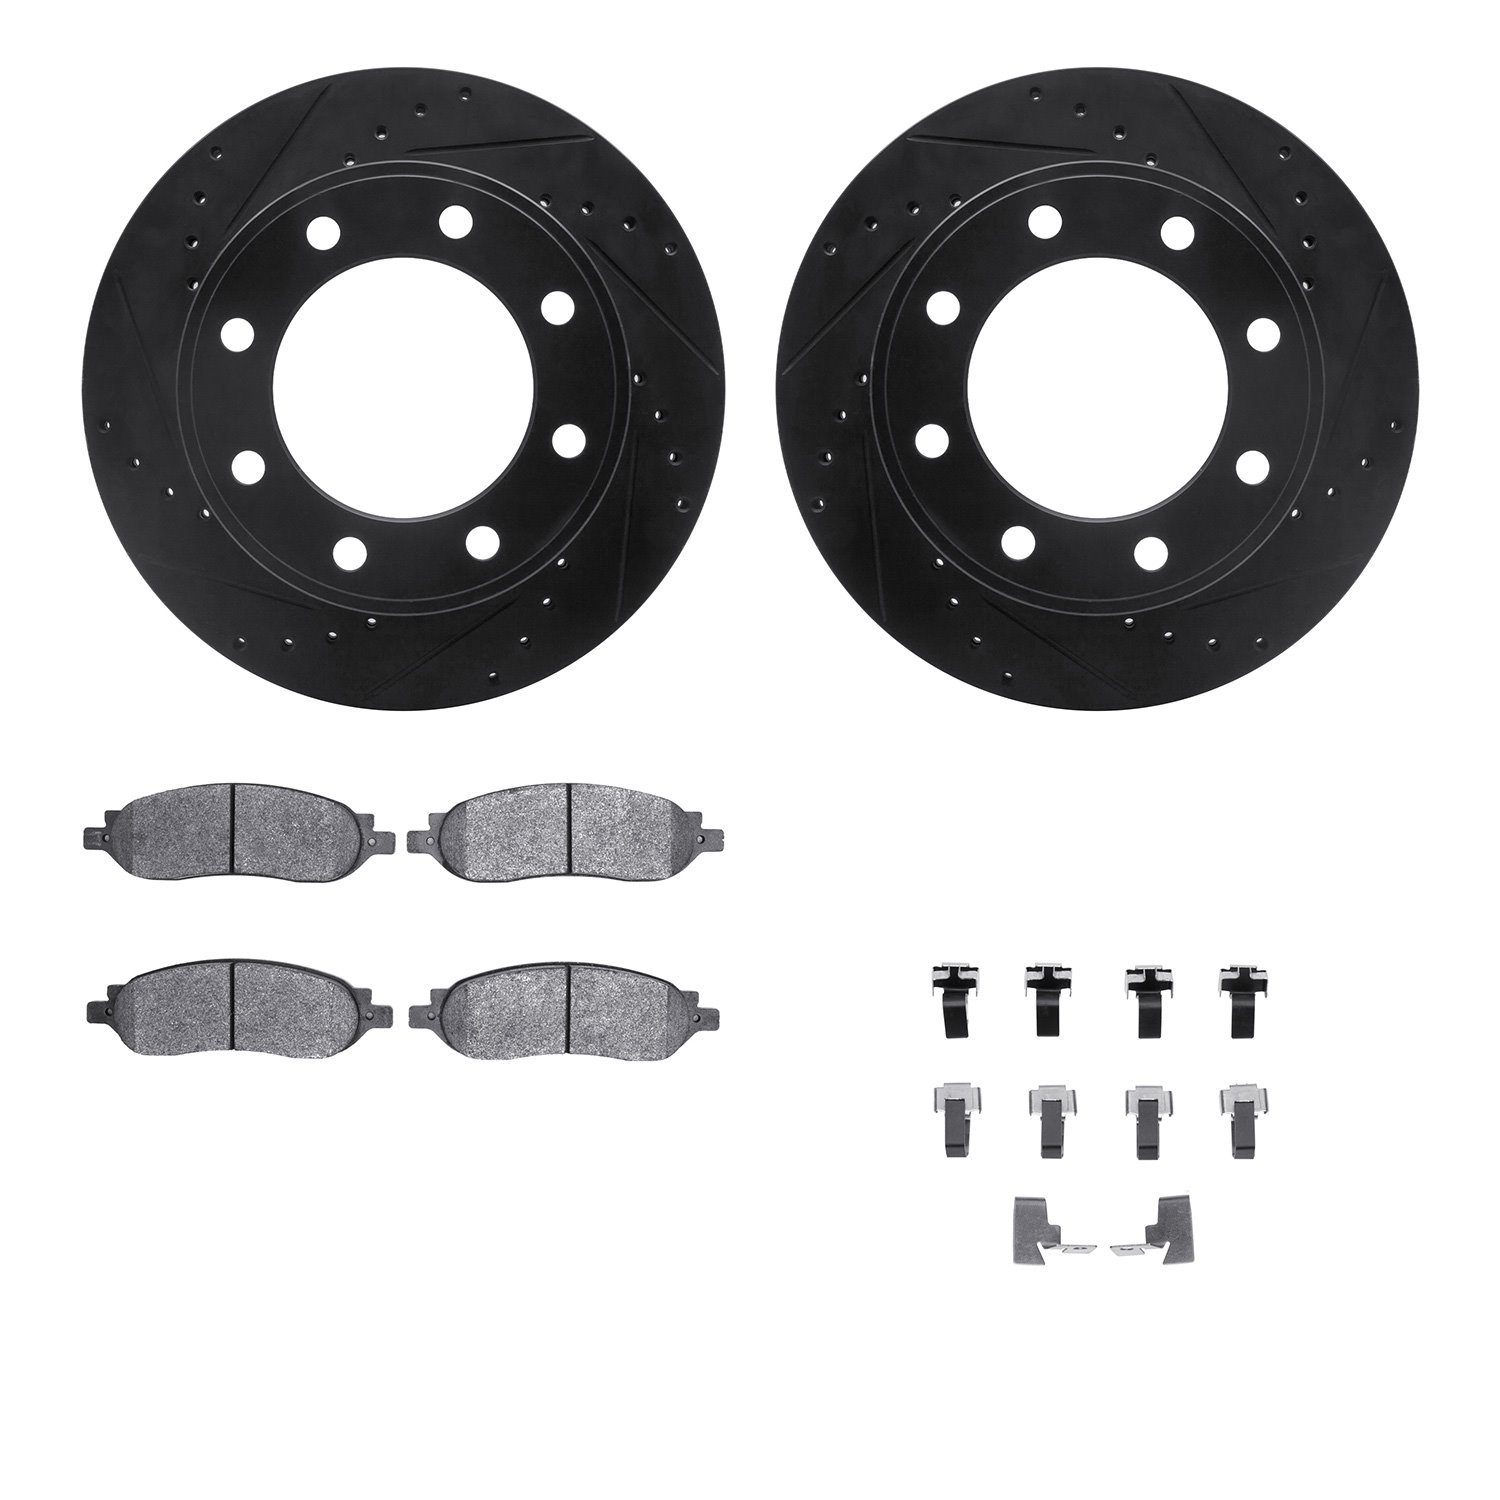 8412-54084 Drilled/Slotted Brake Rotors with Ultimate-Duty Brake Pads Kit & Hardware [Black], 2005-2007 Ford/Lincoln/Mercury/Maz